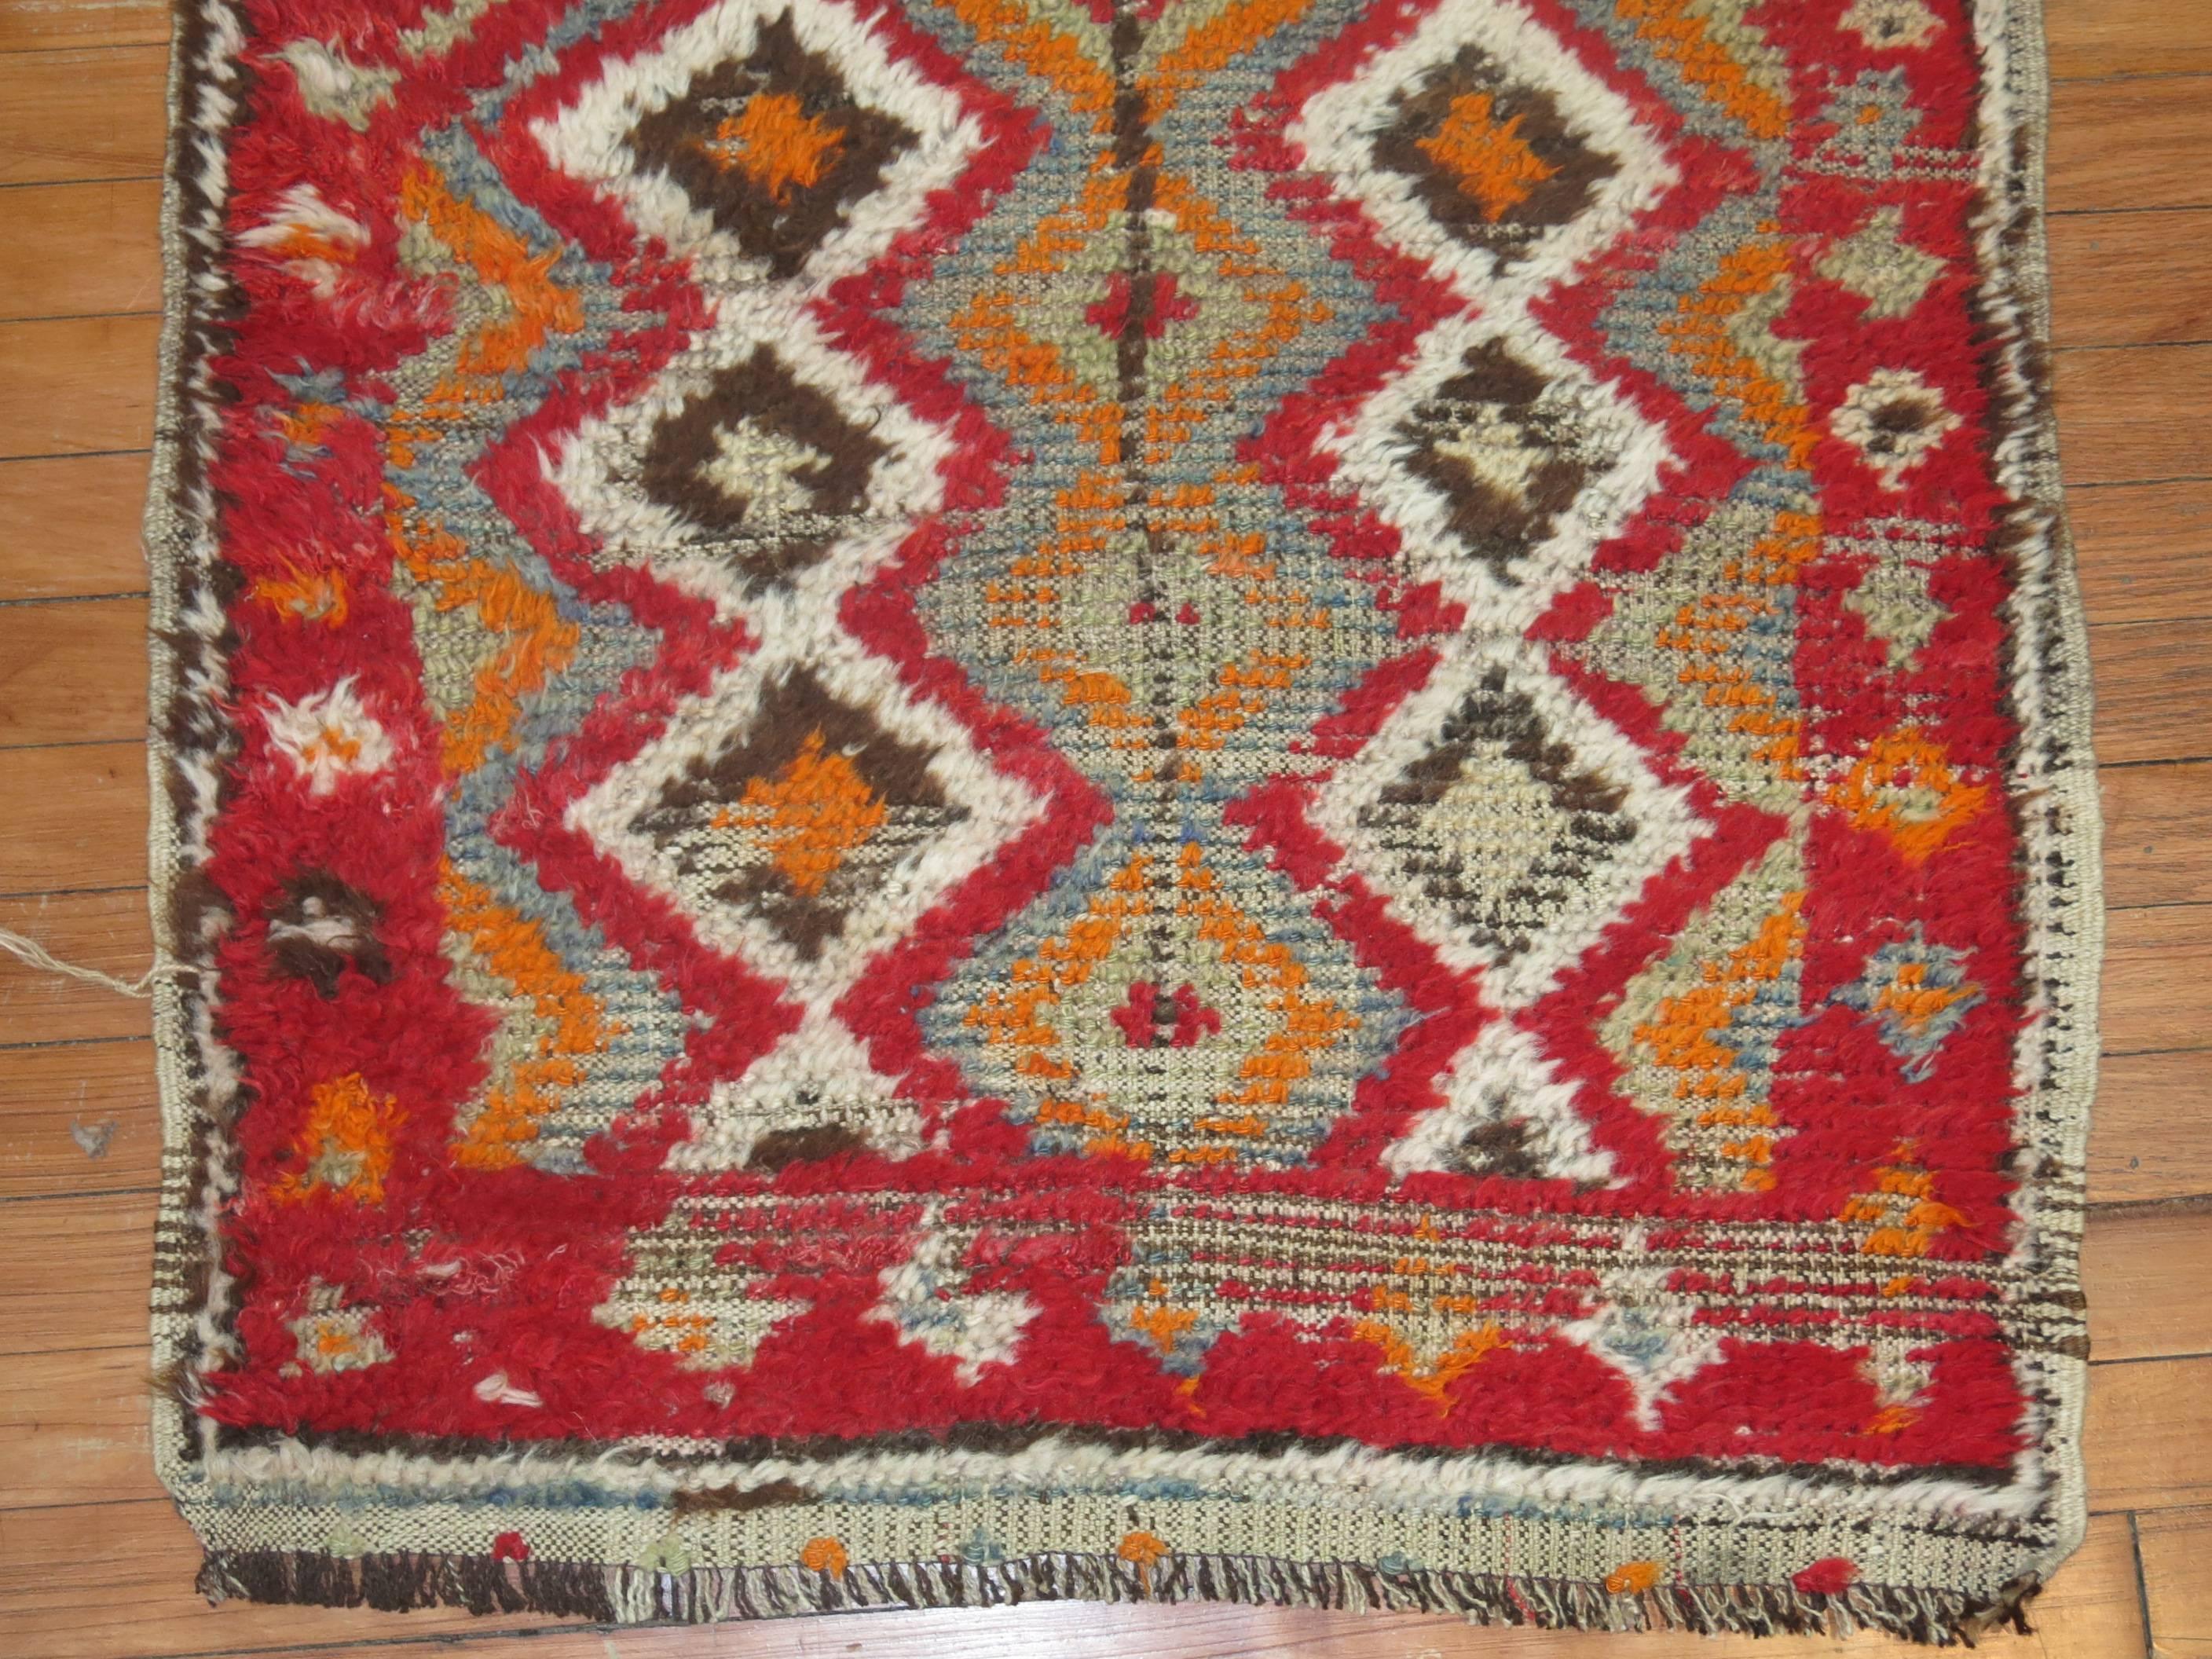 A small square size authentic vintage Moroccan from the early part of the 20th century.